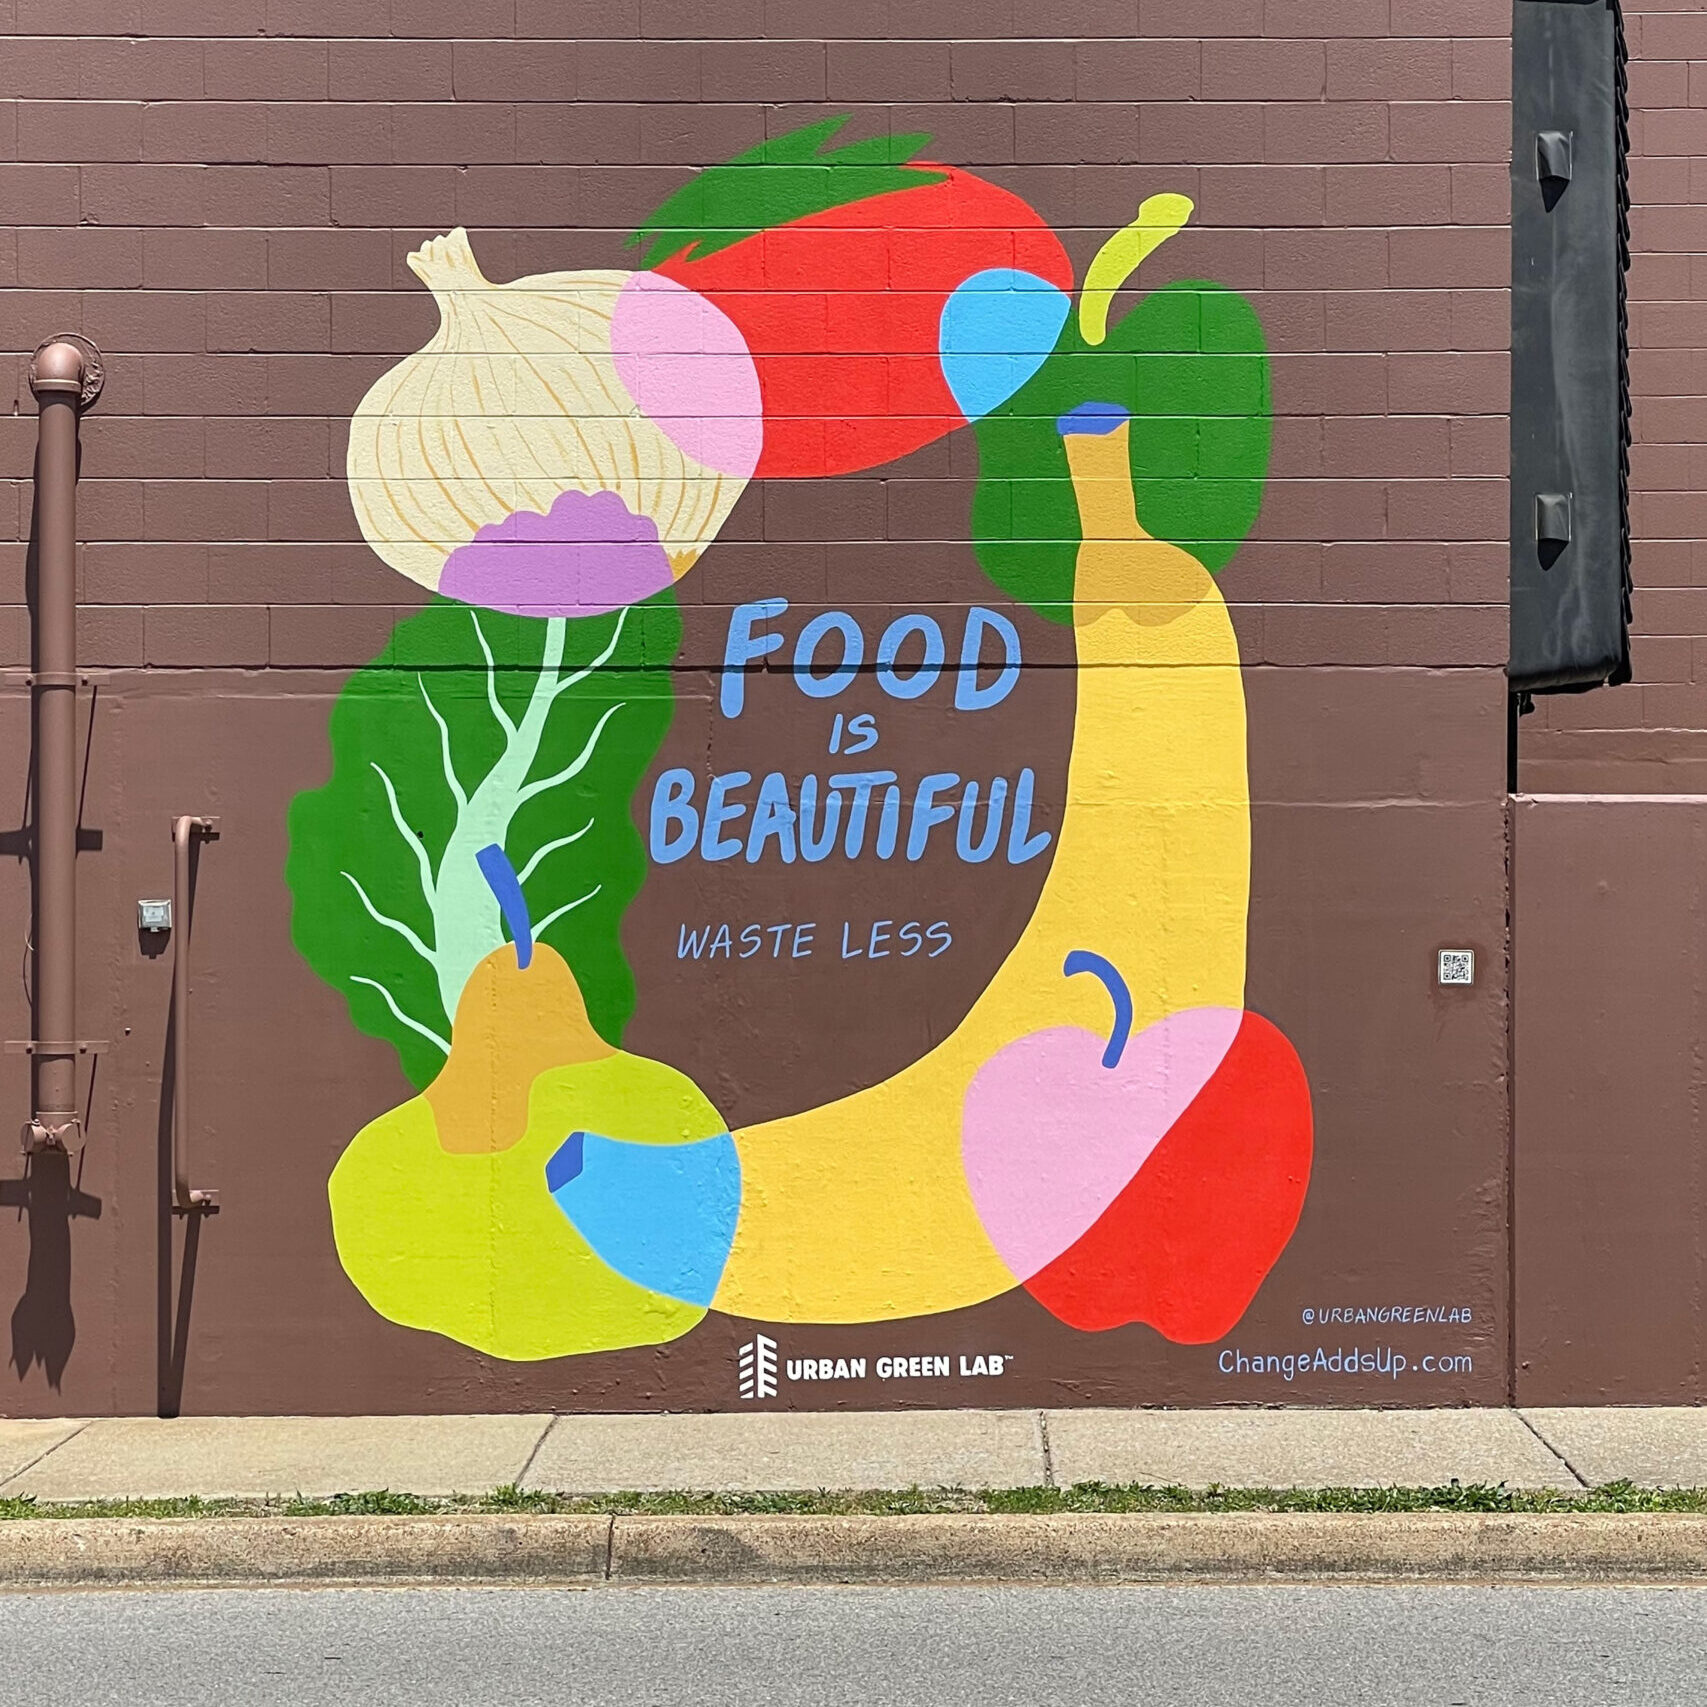 Mural that says "Food is Beautiful. Waste Less."